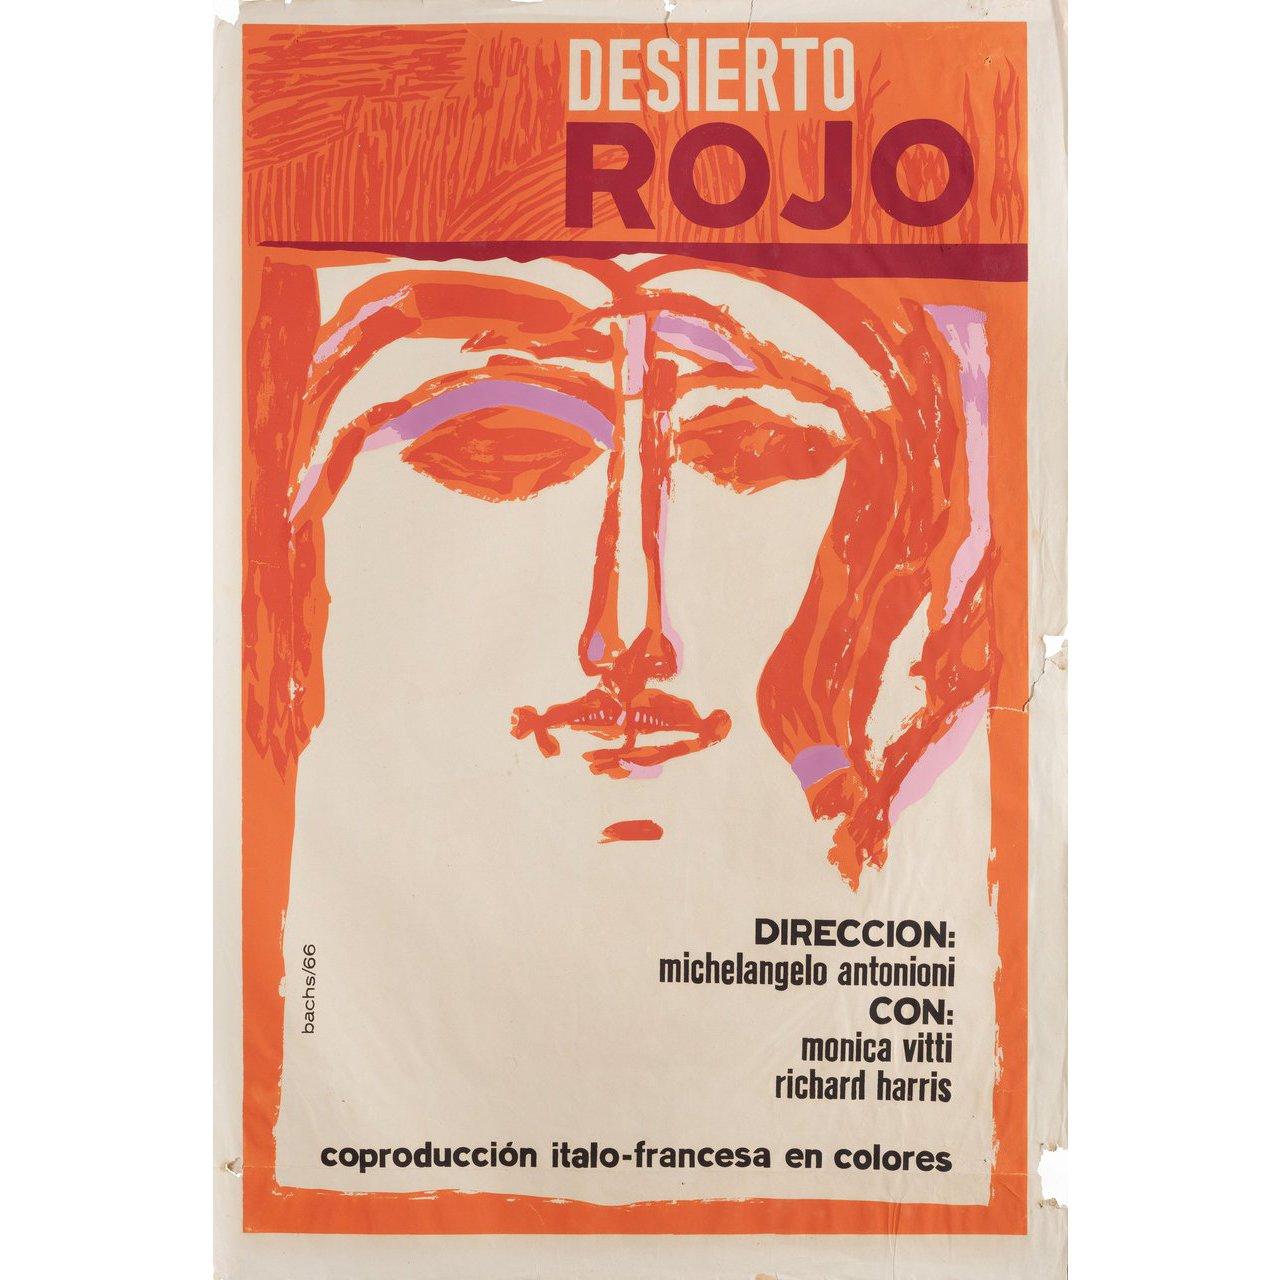 Mid-20th Century Red Desert 1966 Cuban Film Poster For Sale